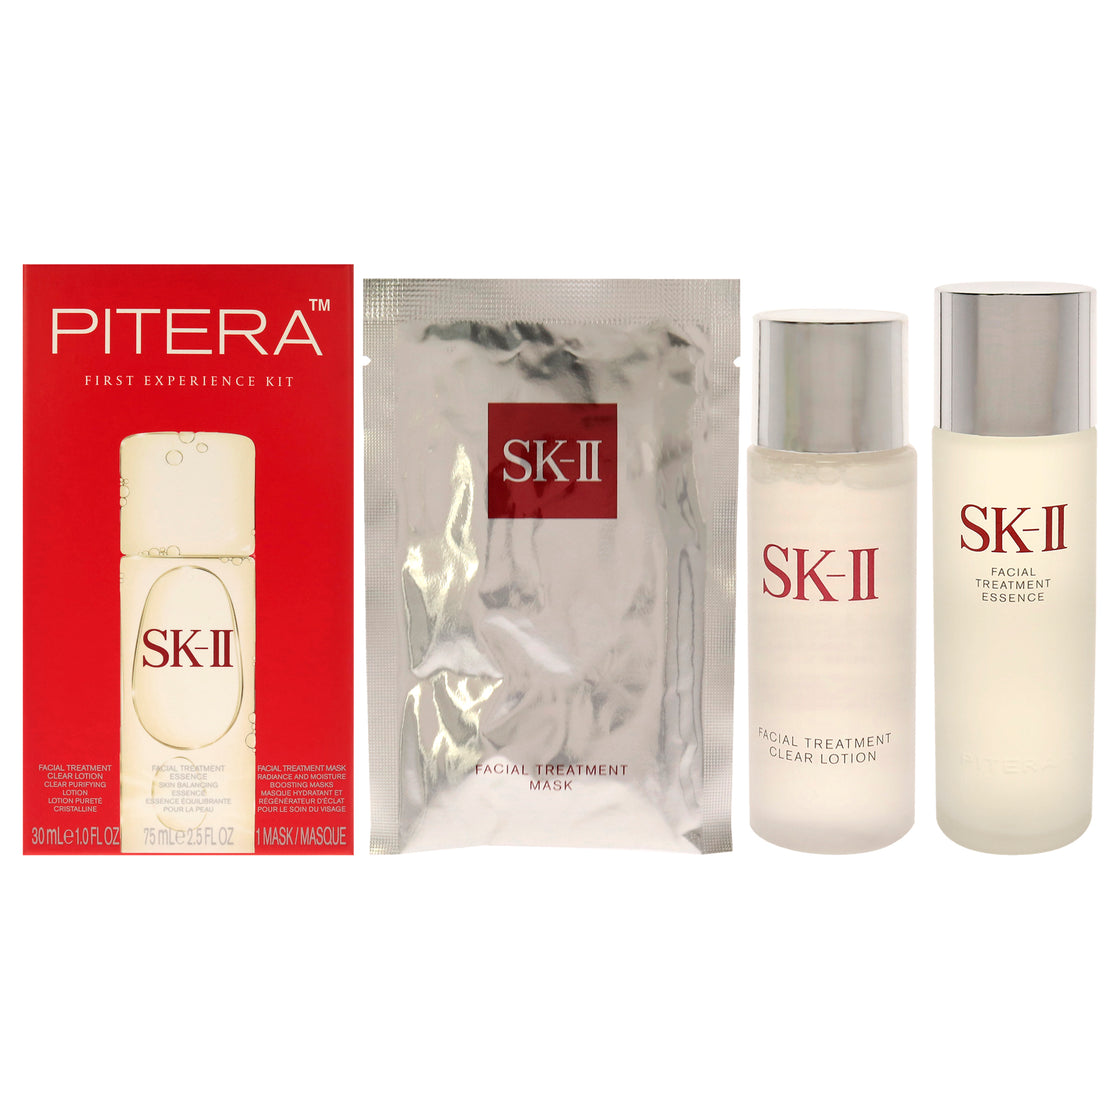 Pitera First Experience Kit by SK-II for Unisex - 3 Pc 2.5oz Facial Treatment Essence , 1oz Facial Treatment Clear Lotion, 1Pc Facial Treatment Mask